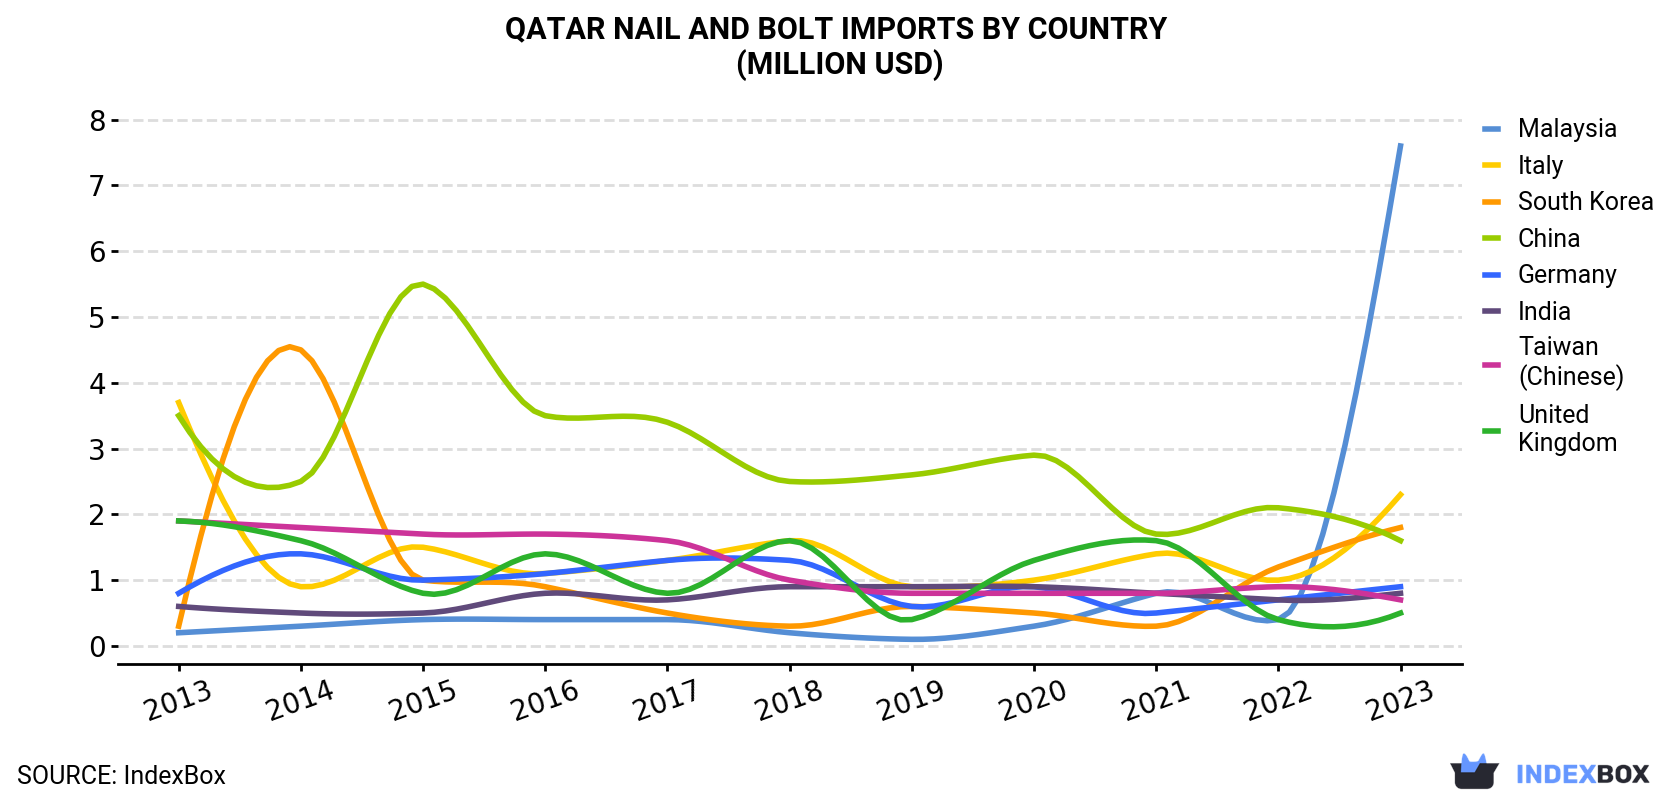 Qatar Nail And Bolt Imports By Country (Million USD)